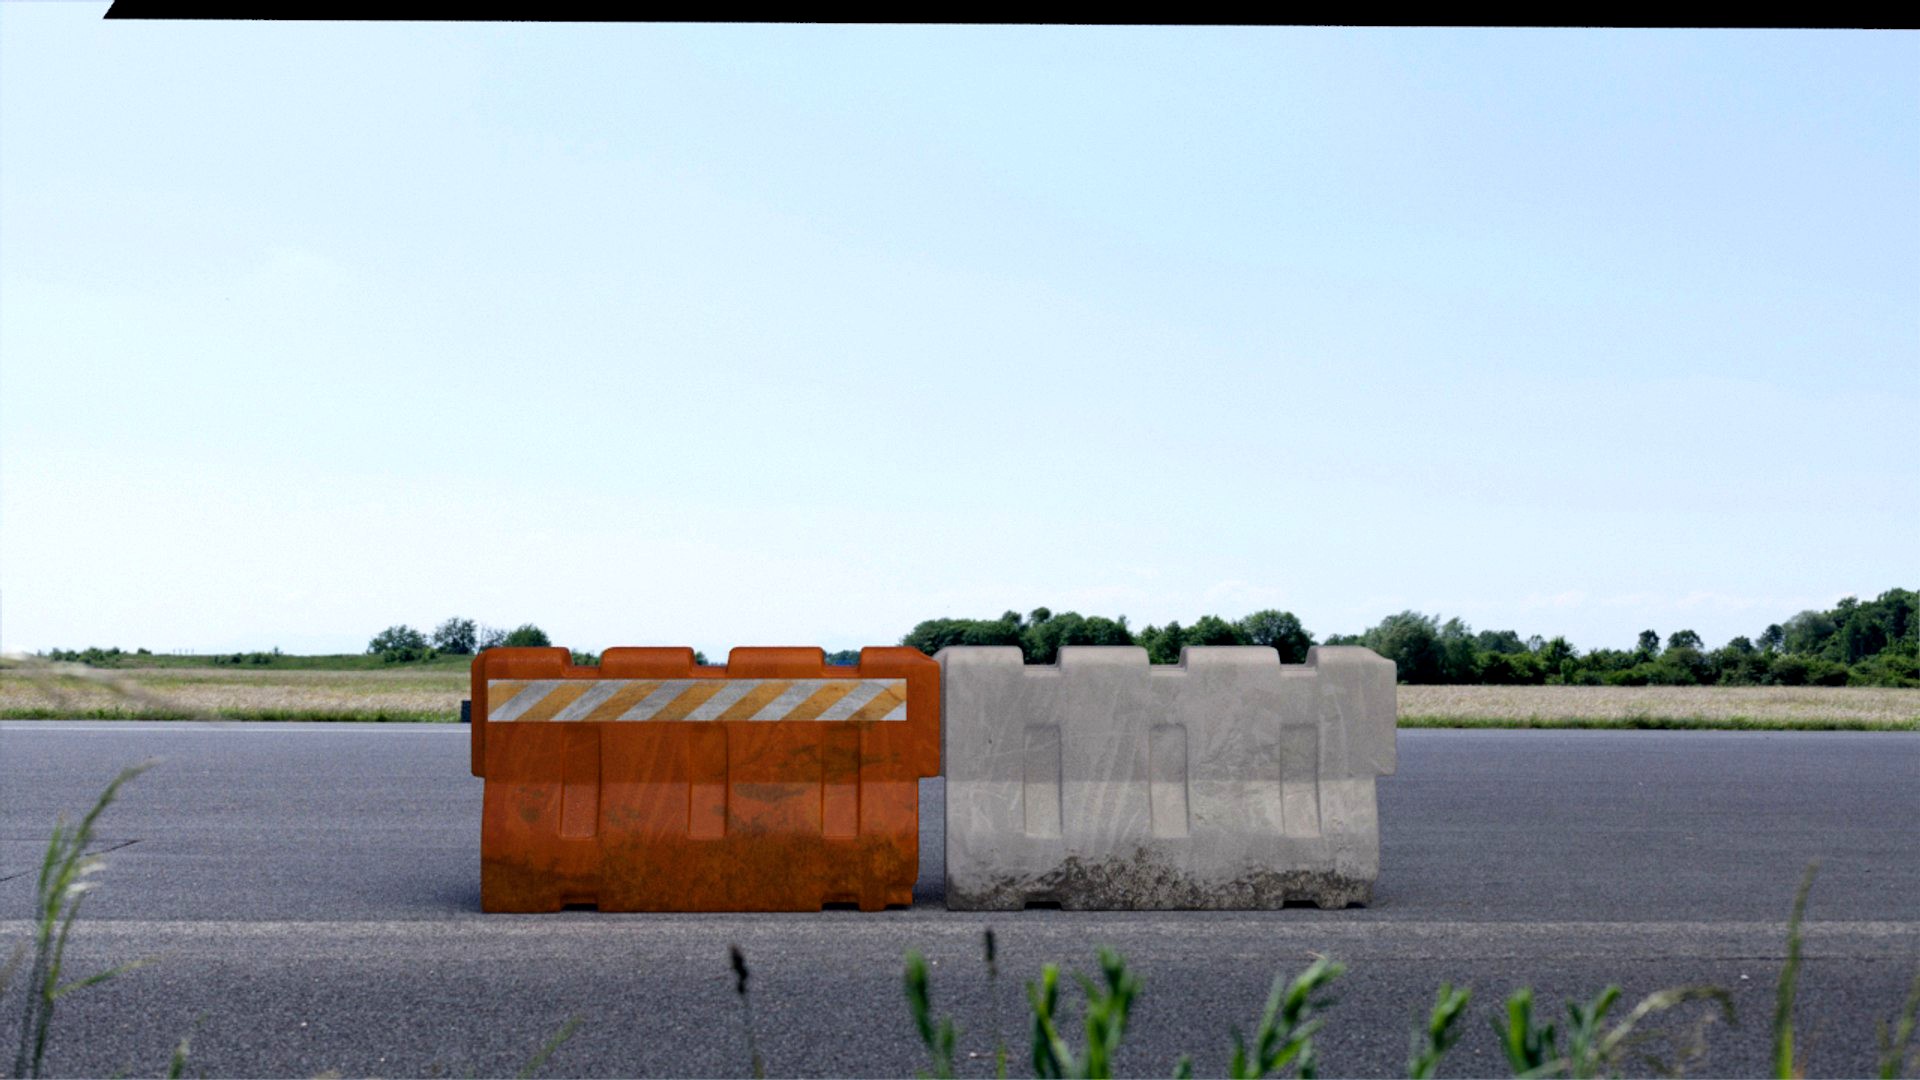 Construction Barriers